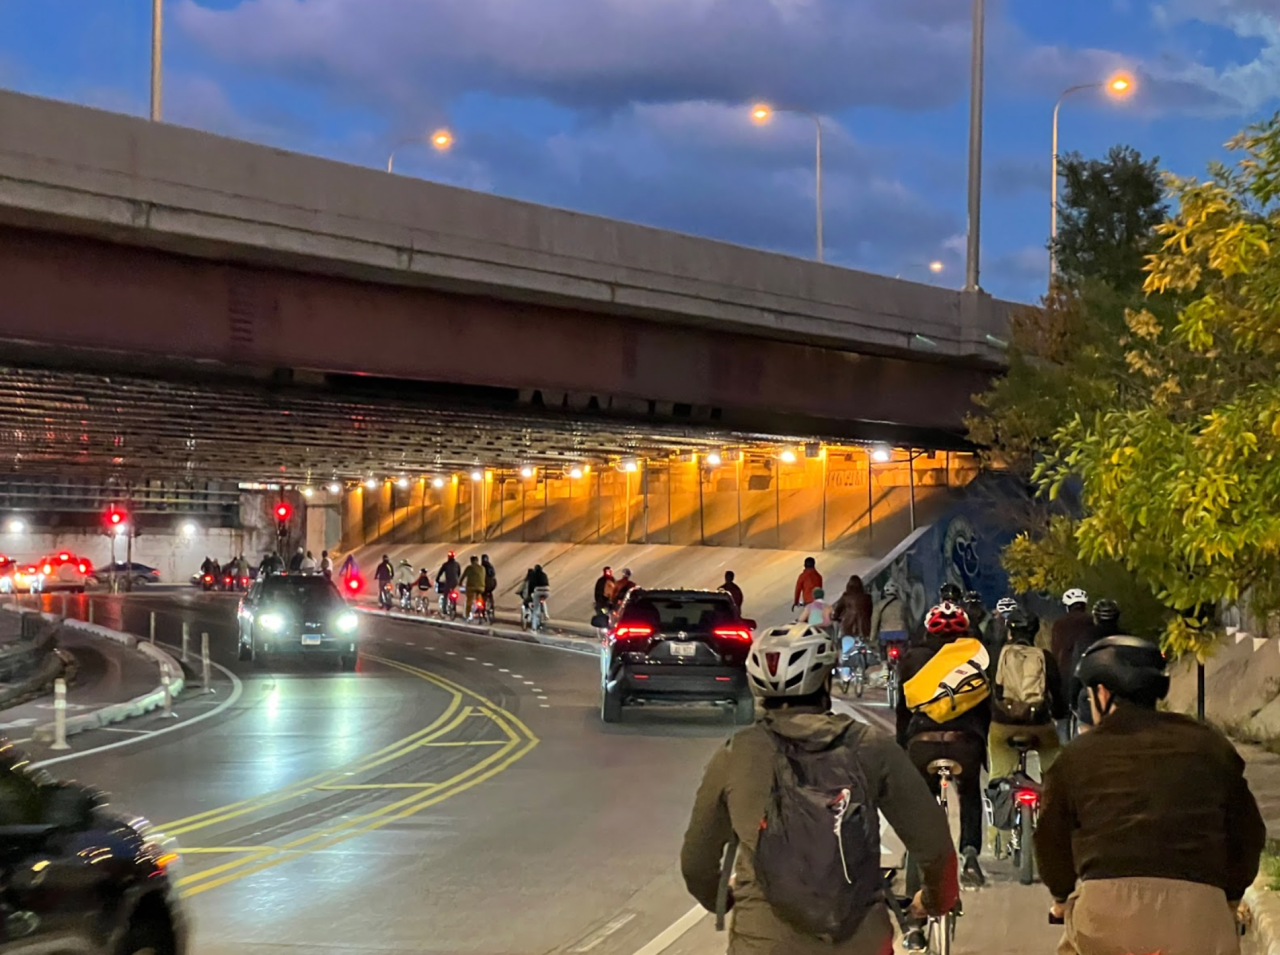 The ride heads east under the Kennedy Expressway on Logan Boulevard. Photo: Kyle Lucas